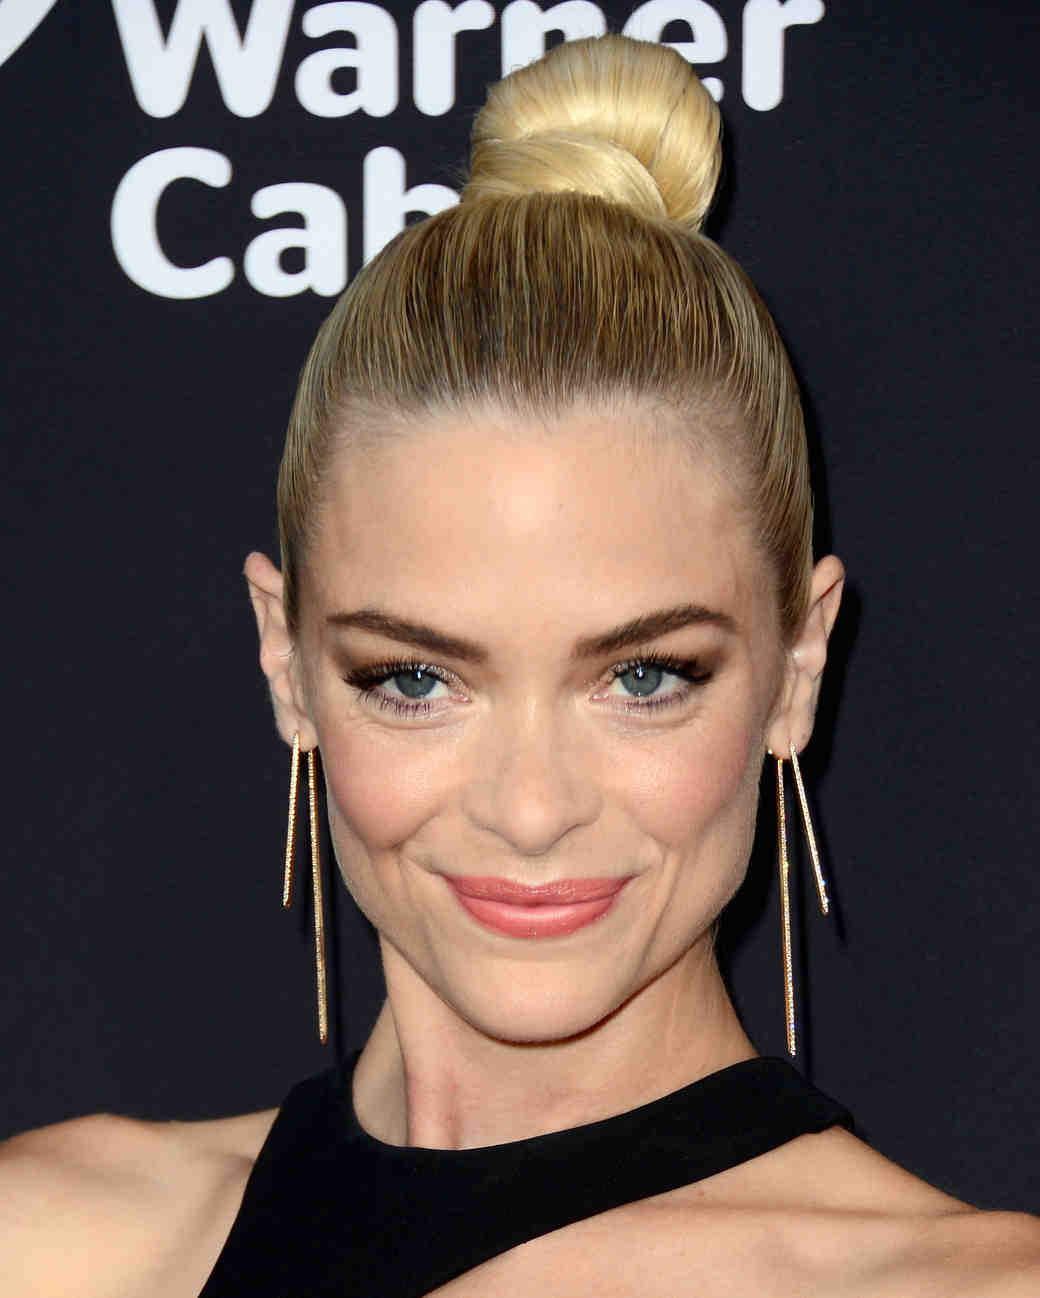 15 Celebrity Hairstyle How-Tos to Try for Your Wedding Day 